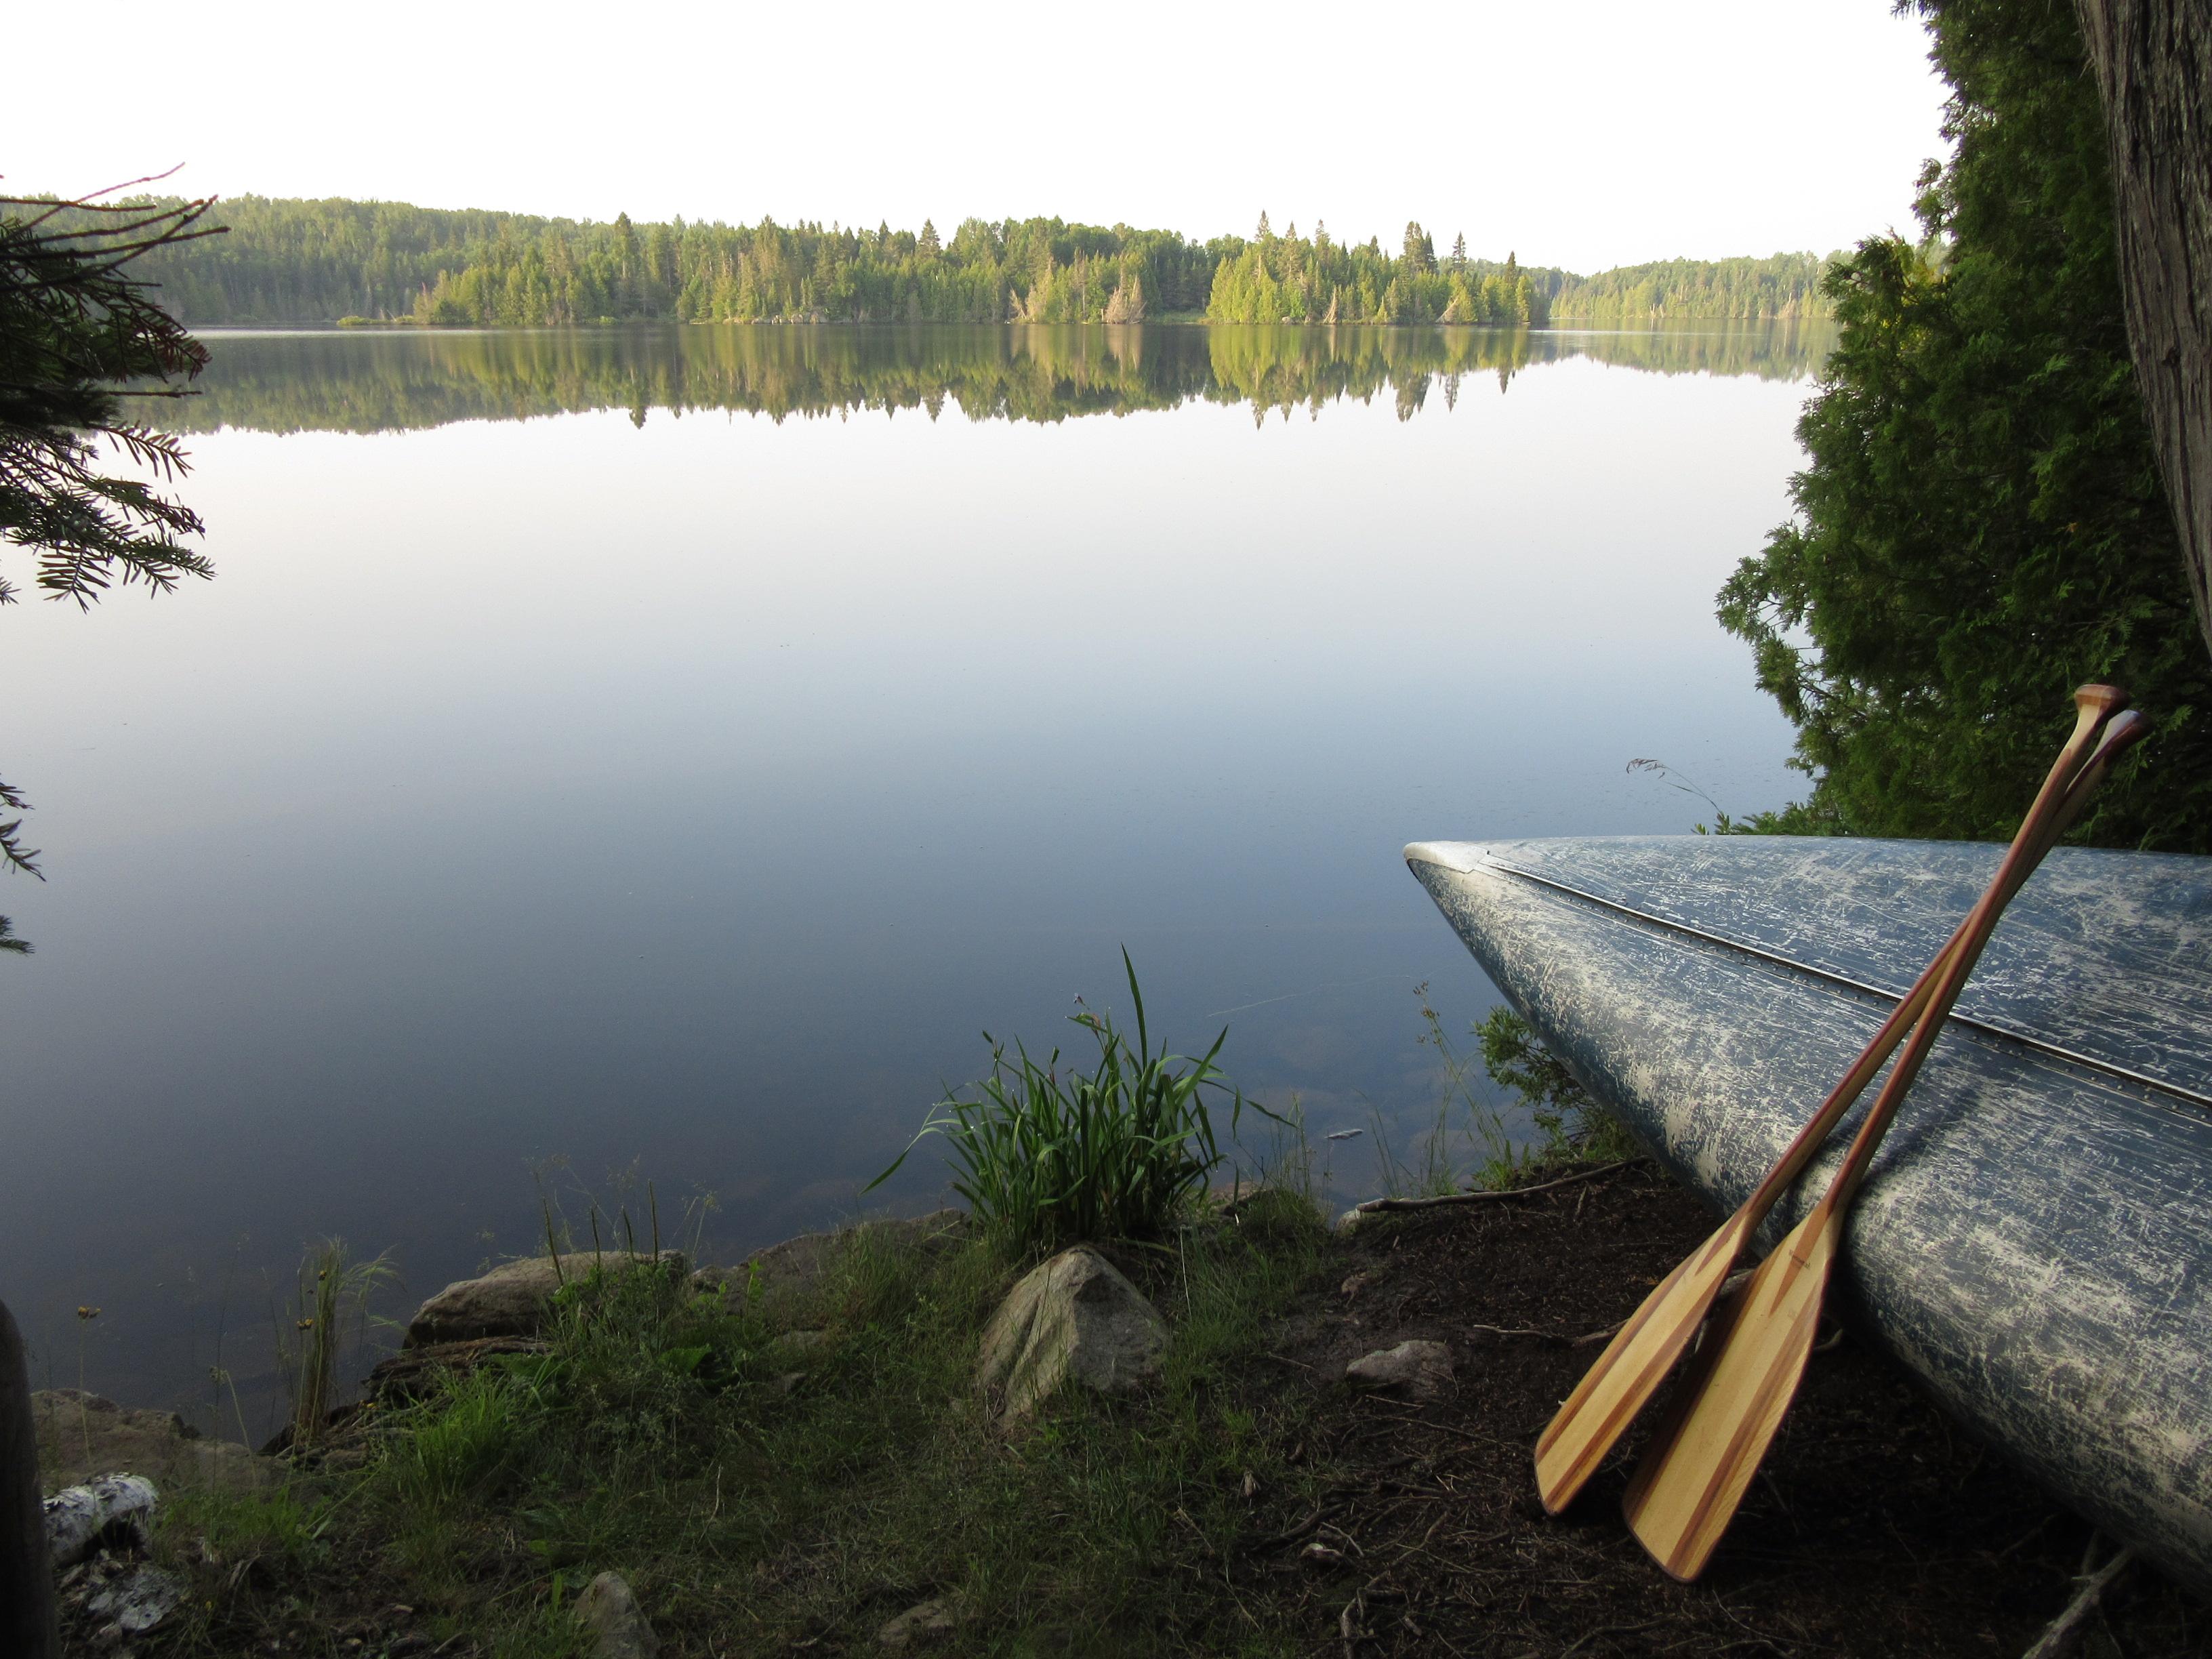 Calm waters of a small lake greet the bow of an overturned canoe with paddles resting against it.